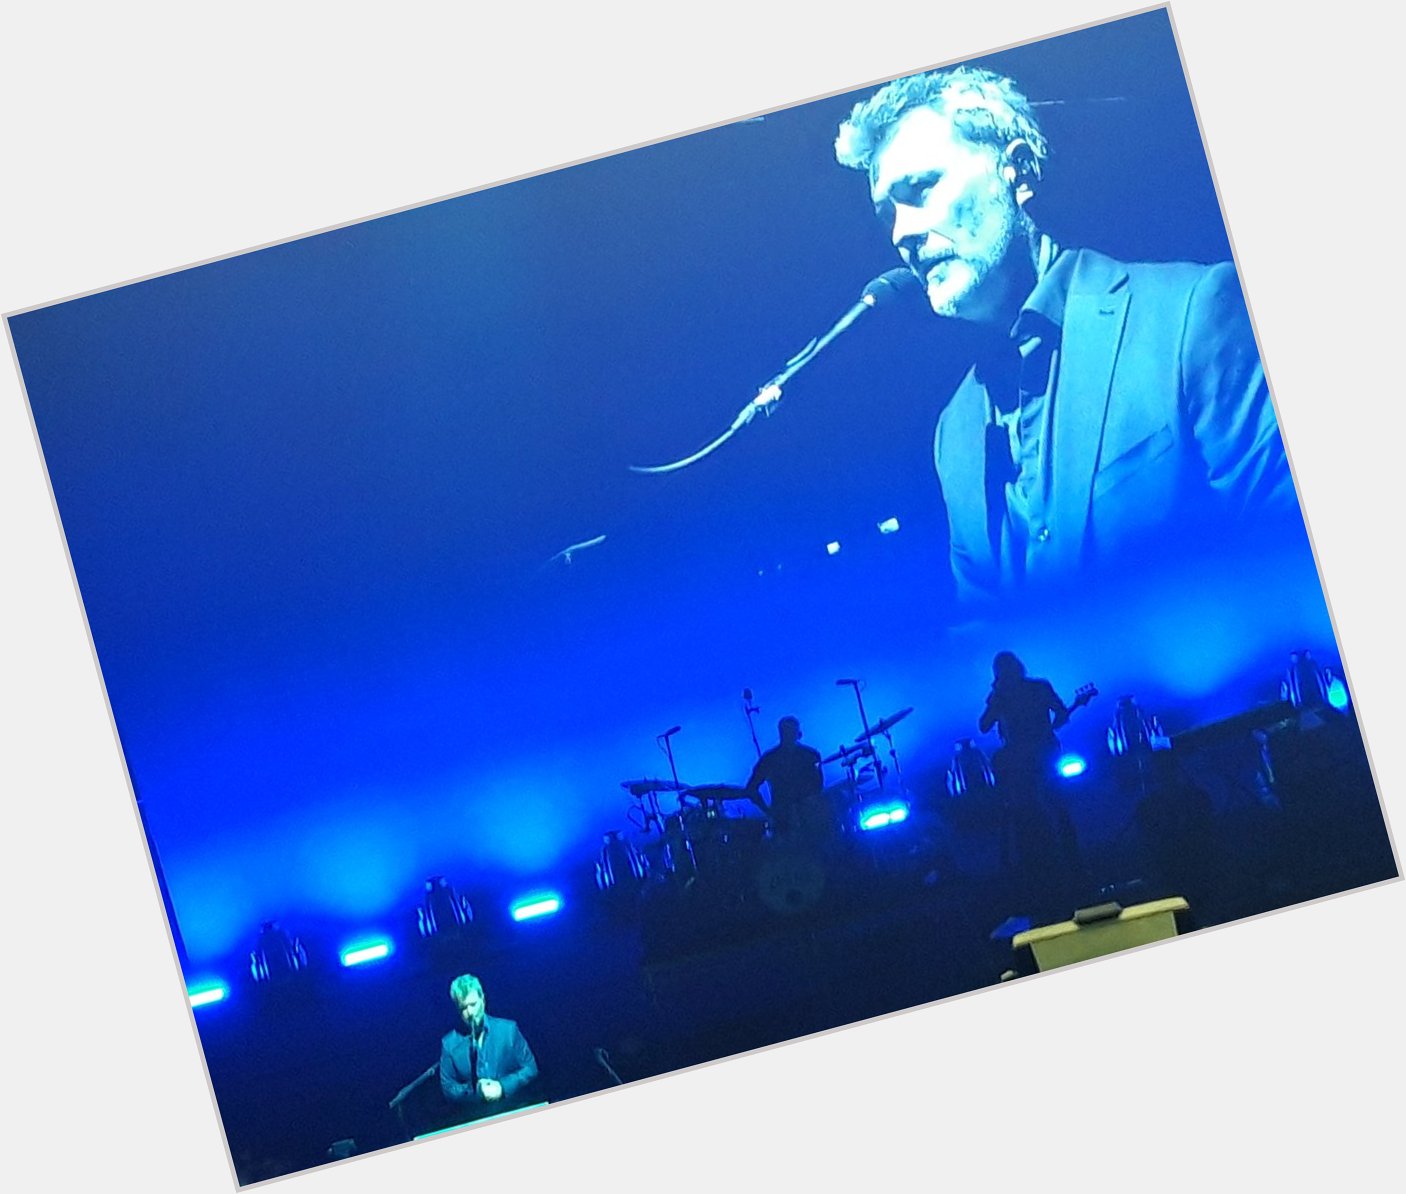 Happy birthday to Magne Furuholmen! It\s been one year since I last saw A-ha live in Glasgow. My last gig of 2019. 